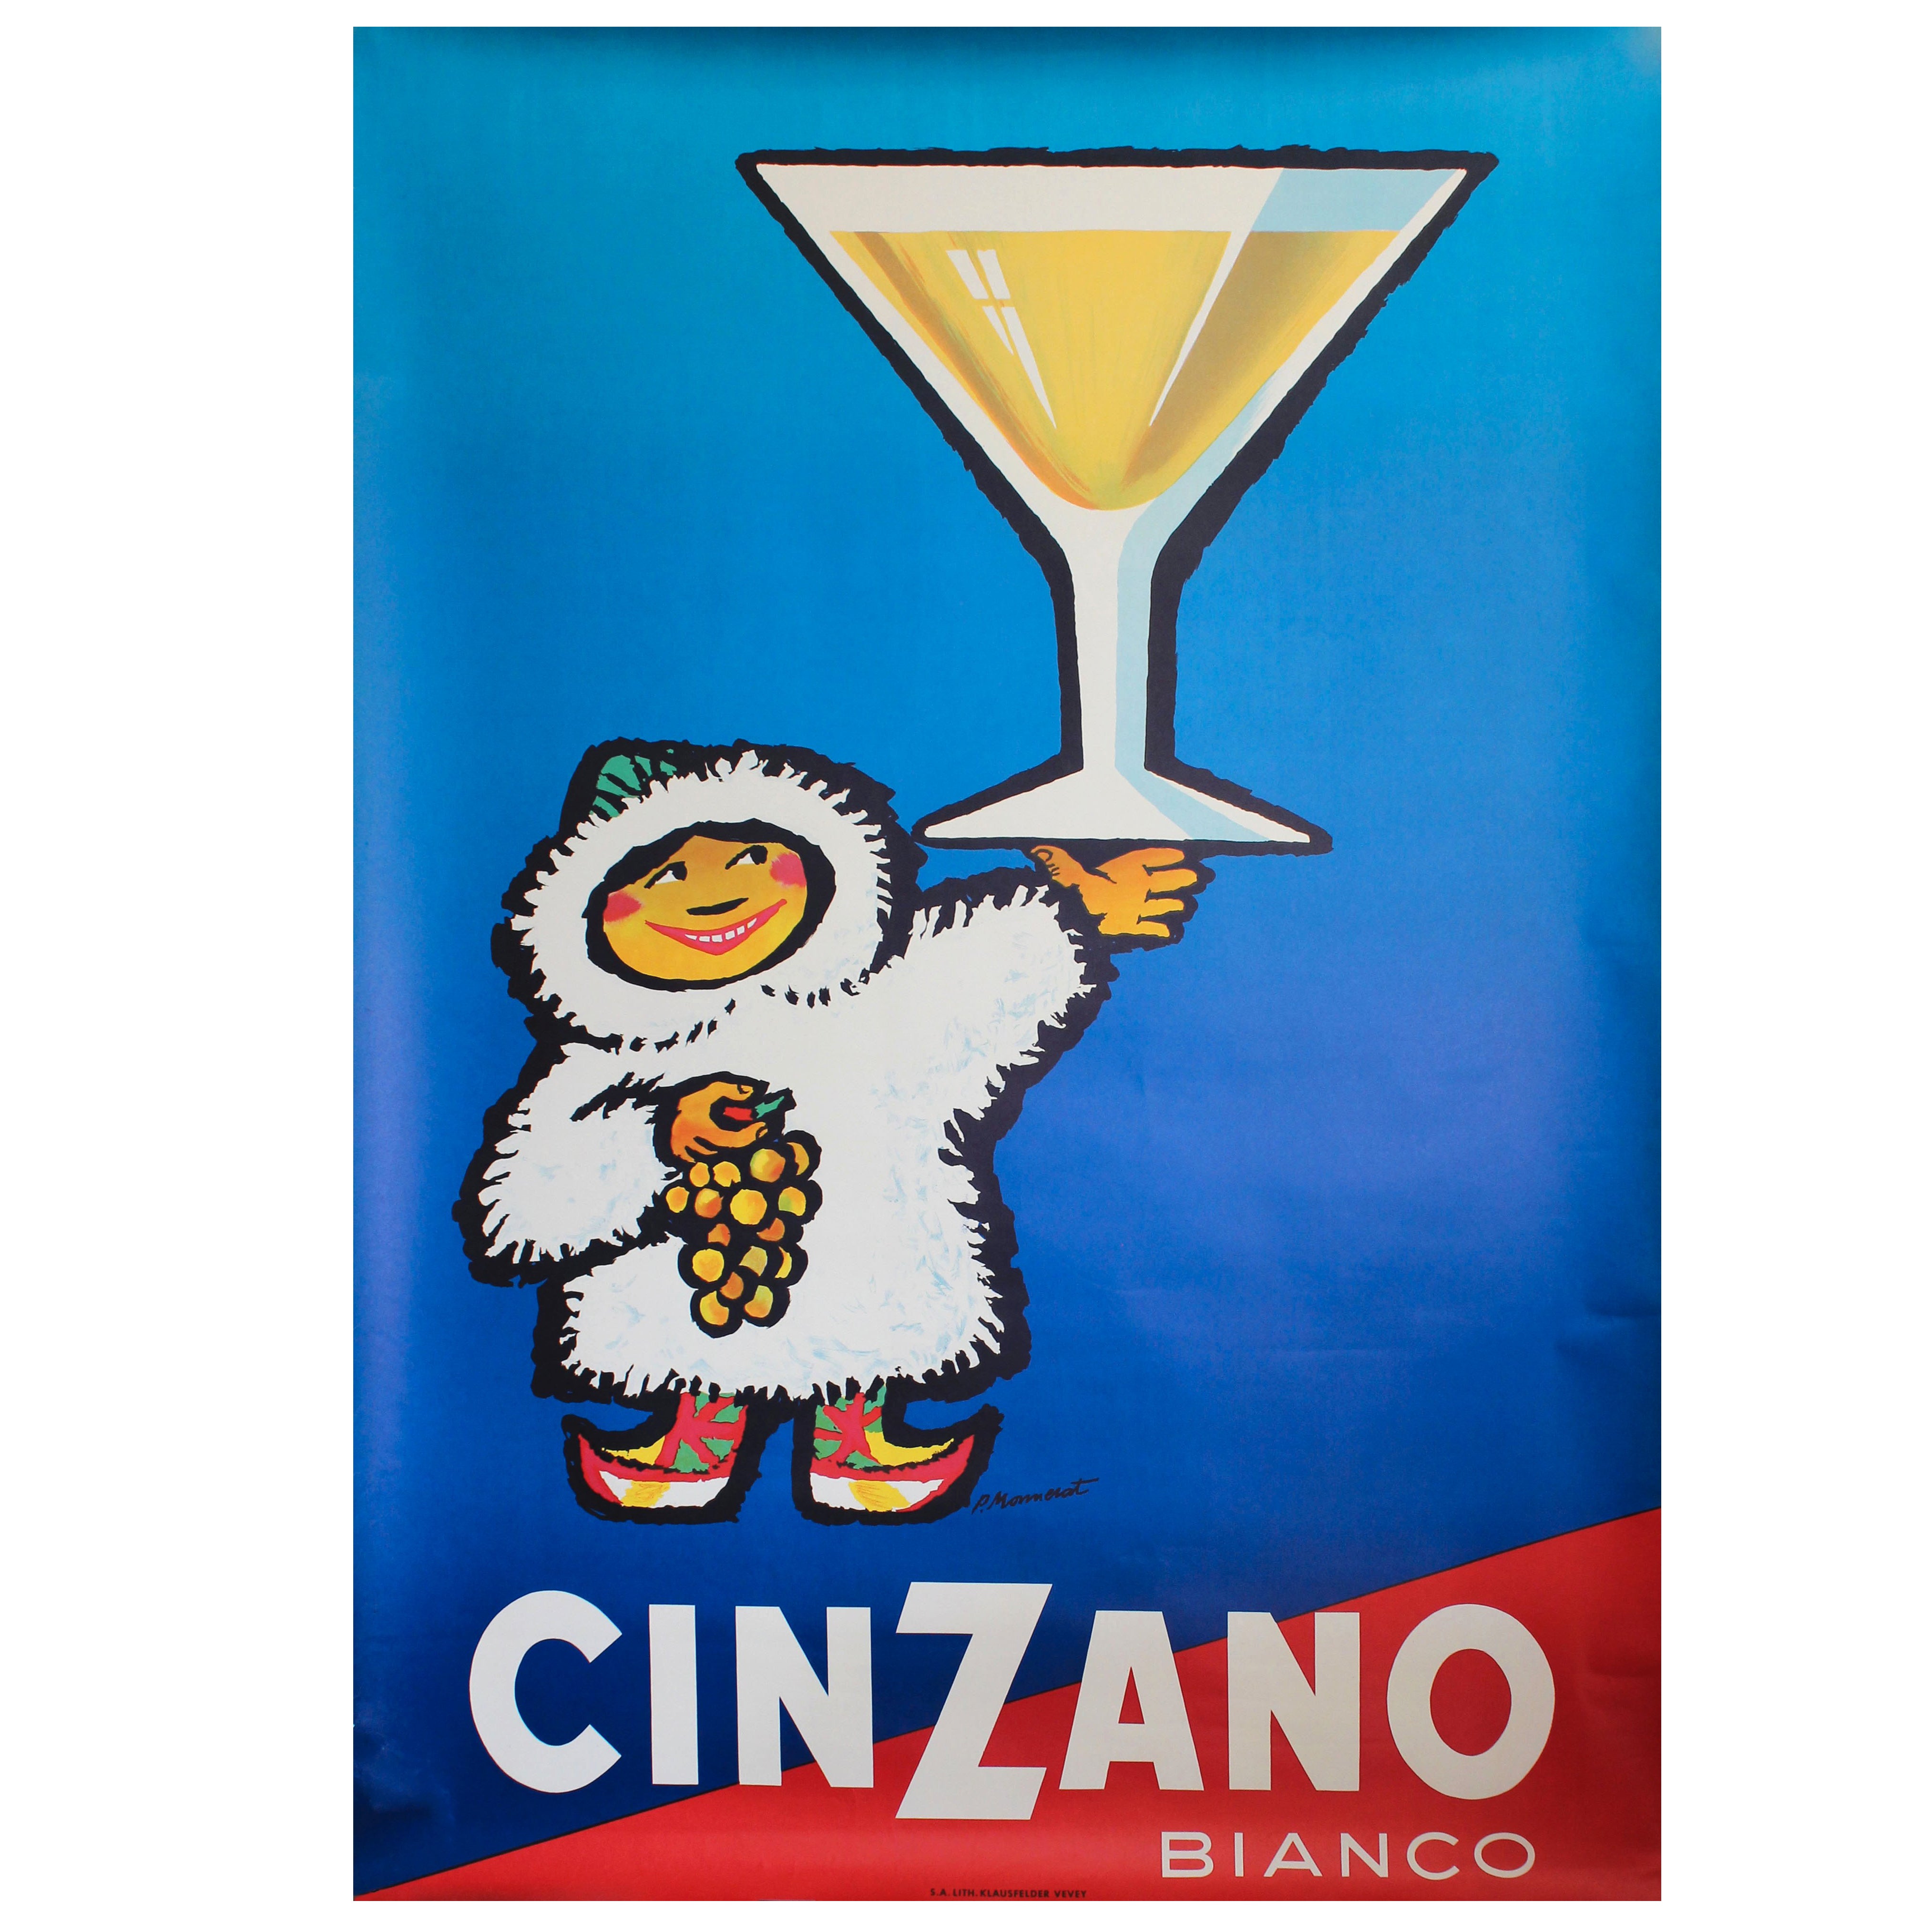 Large Original Vintage 1950s Drink Advertising Poster for Cinzano Vermouth  For Sale at 1stDibs